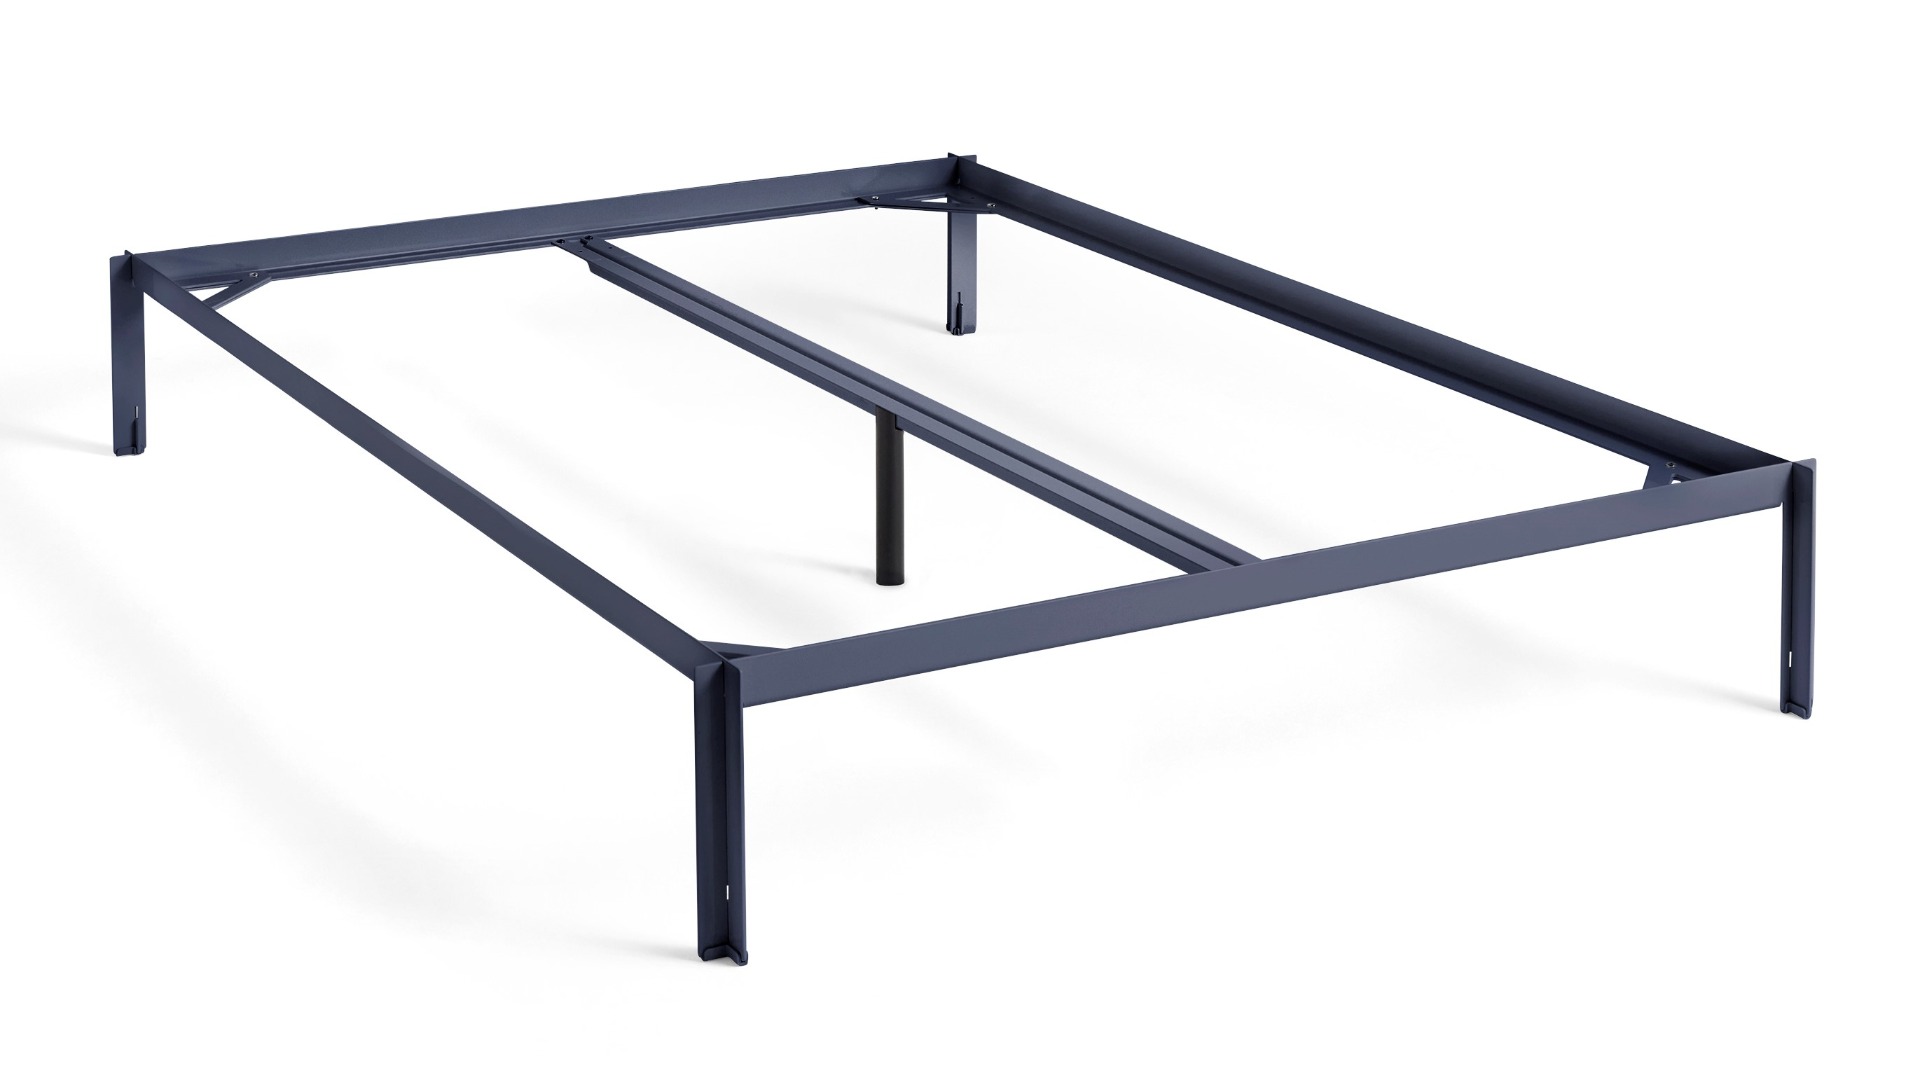 https://www.fundesign.nl/media/catalog/product/a/b/ab073-b559-ah37_connect_bed_w140xl200xh30_with_support_bar_deep_blue_-_kopie.jpg